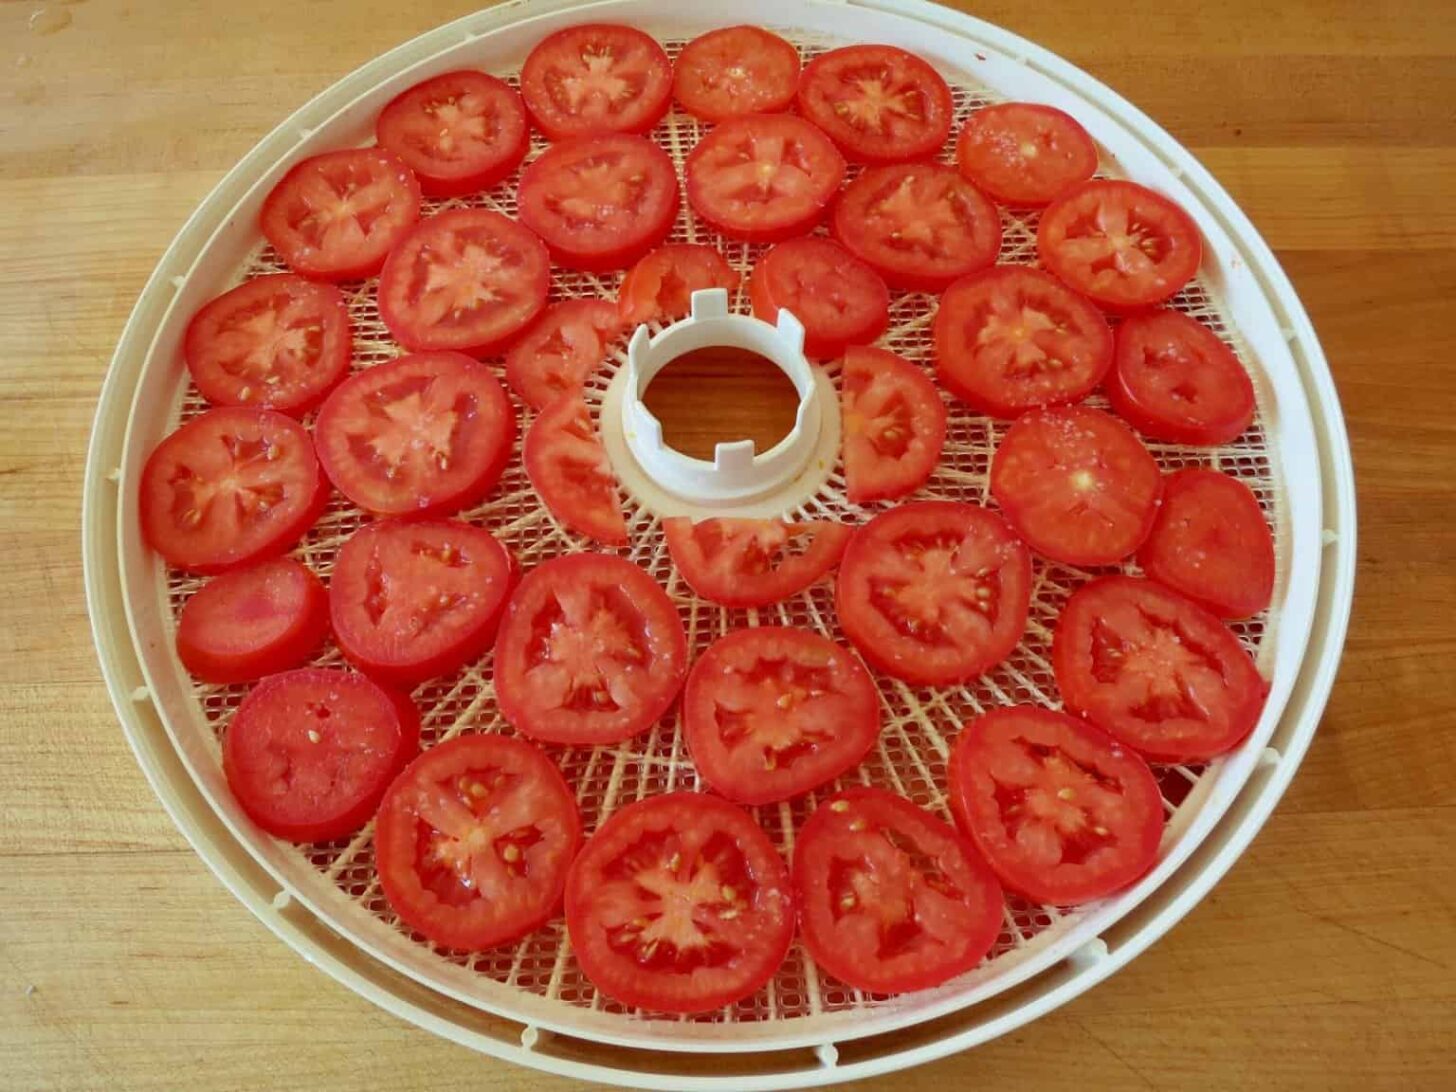 Tomatoes spread out on a dehydration rack.